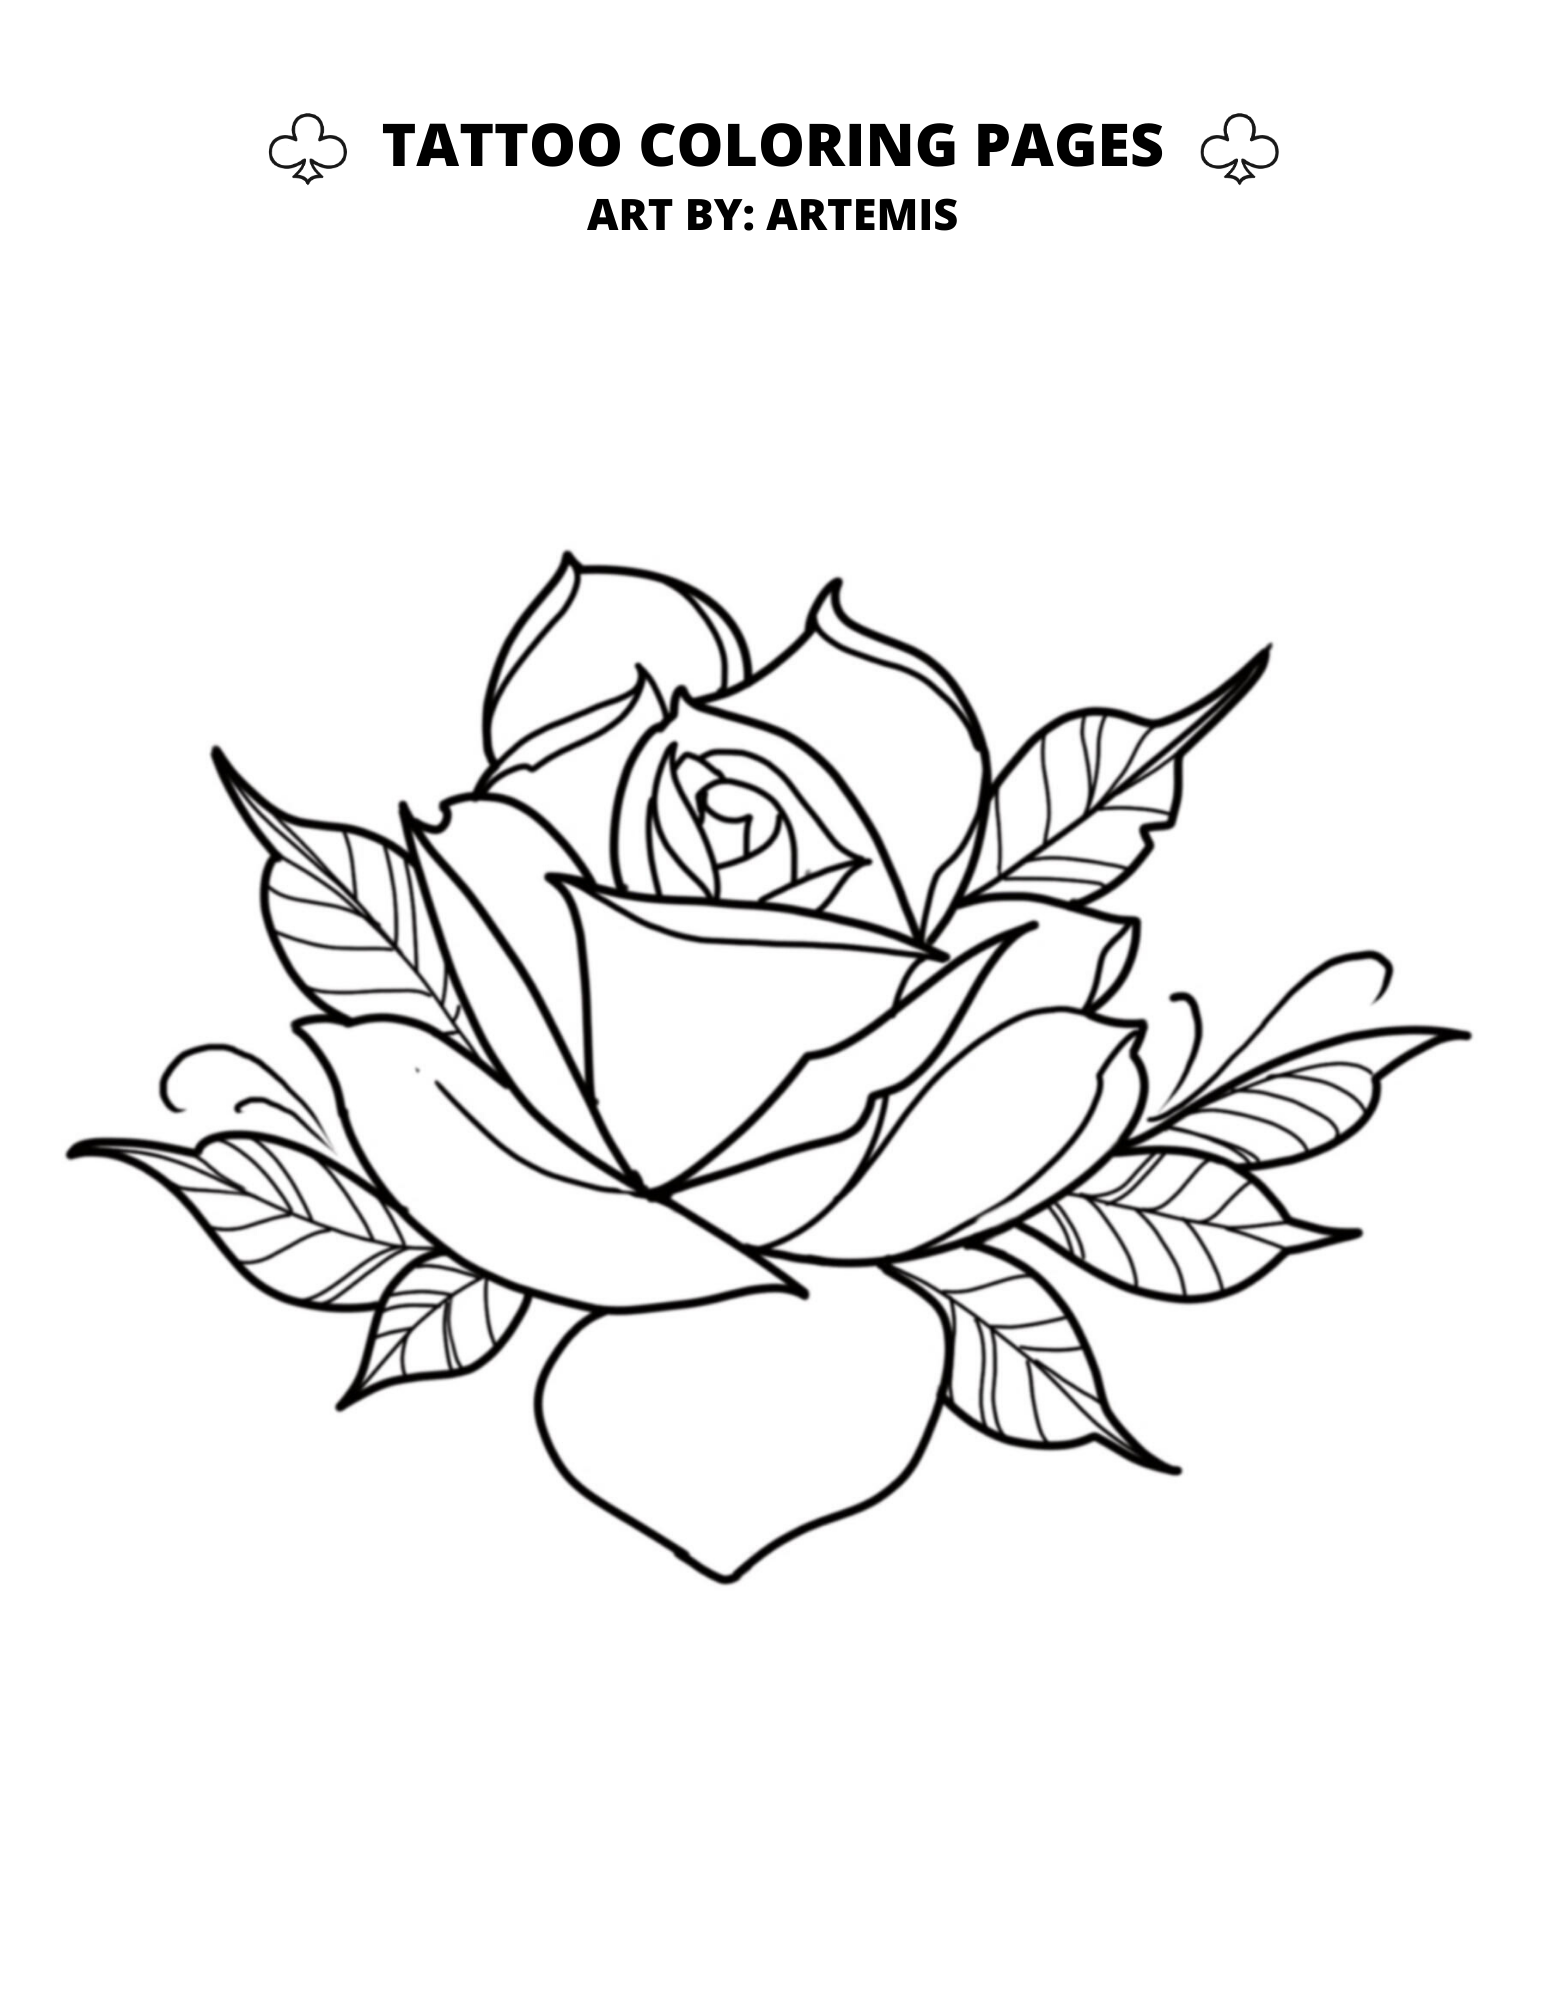 Download Tattoo Coloring Pages Club Tattoo